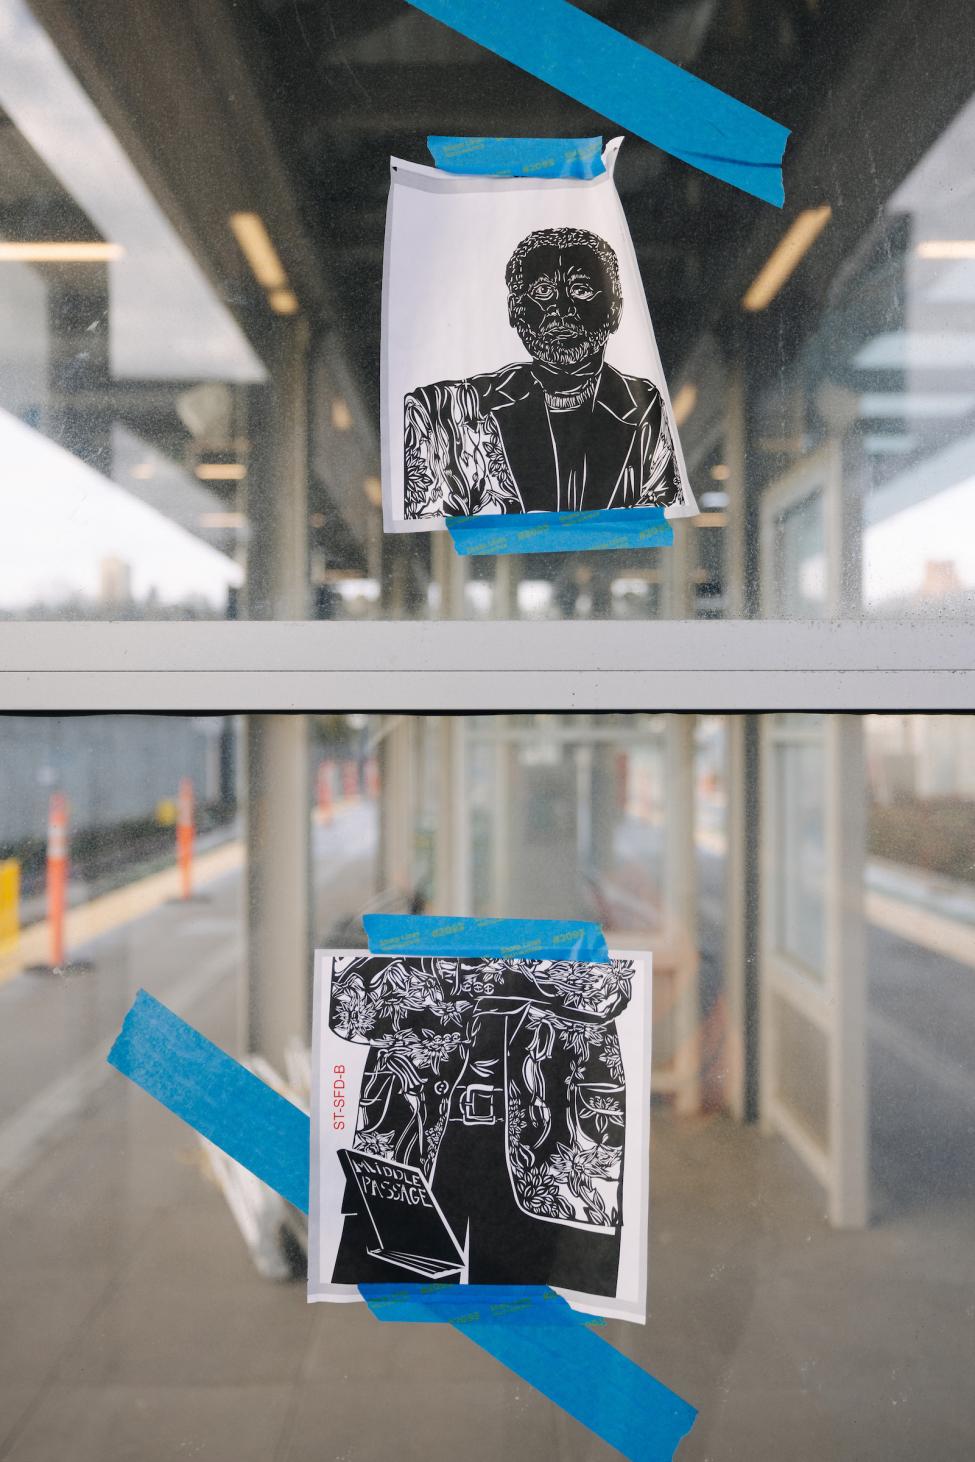 Concept art by Barbara Earl Thomas is taped to the glass of a windscreen on a light rail station platform. 